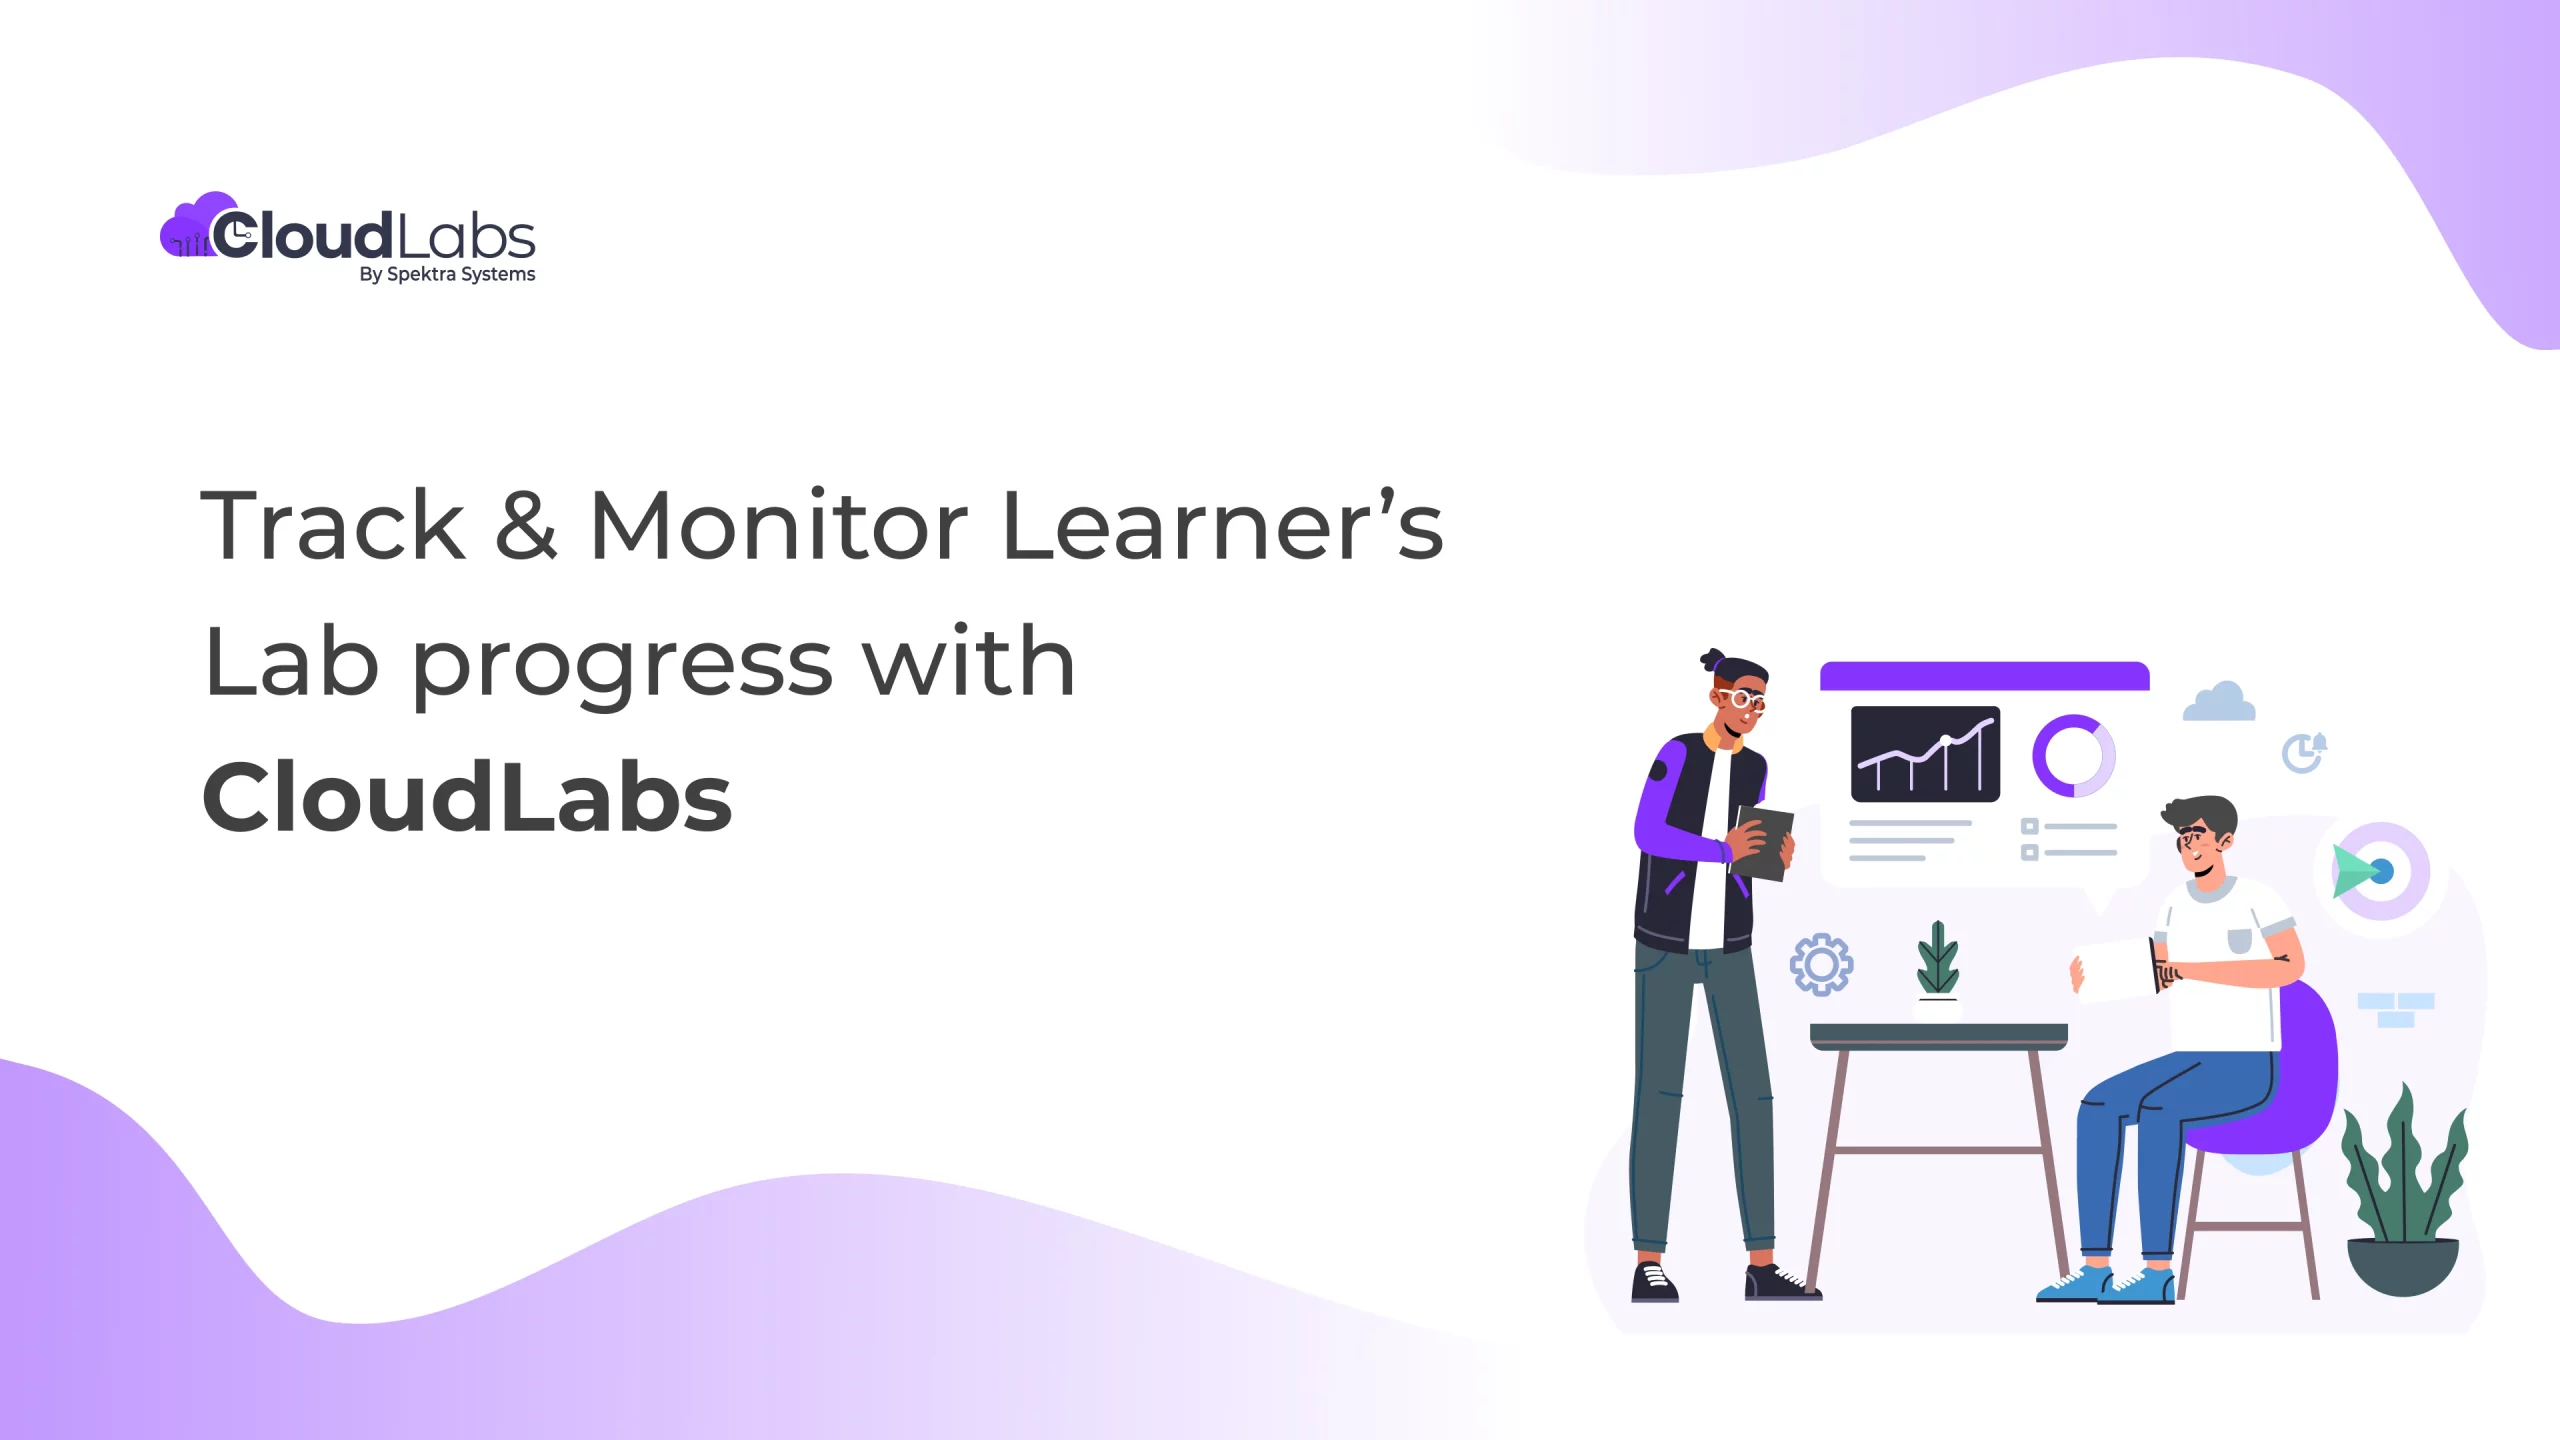 Track & Monitor Learner’s Lab progress with CloudLabs